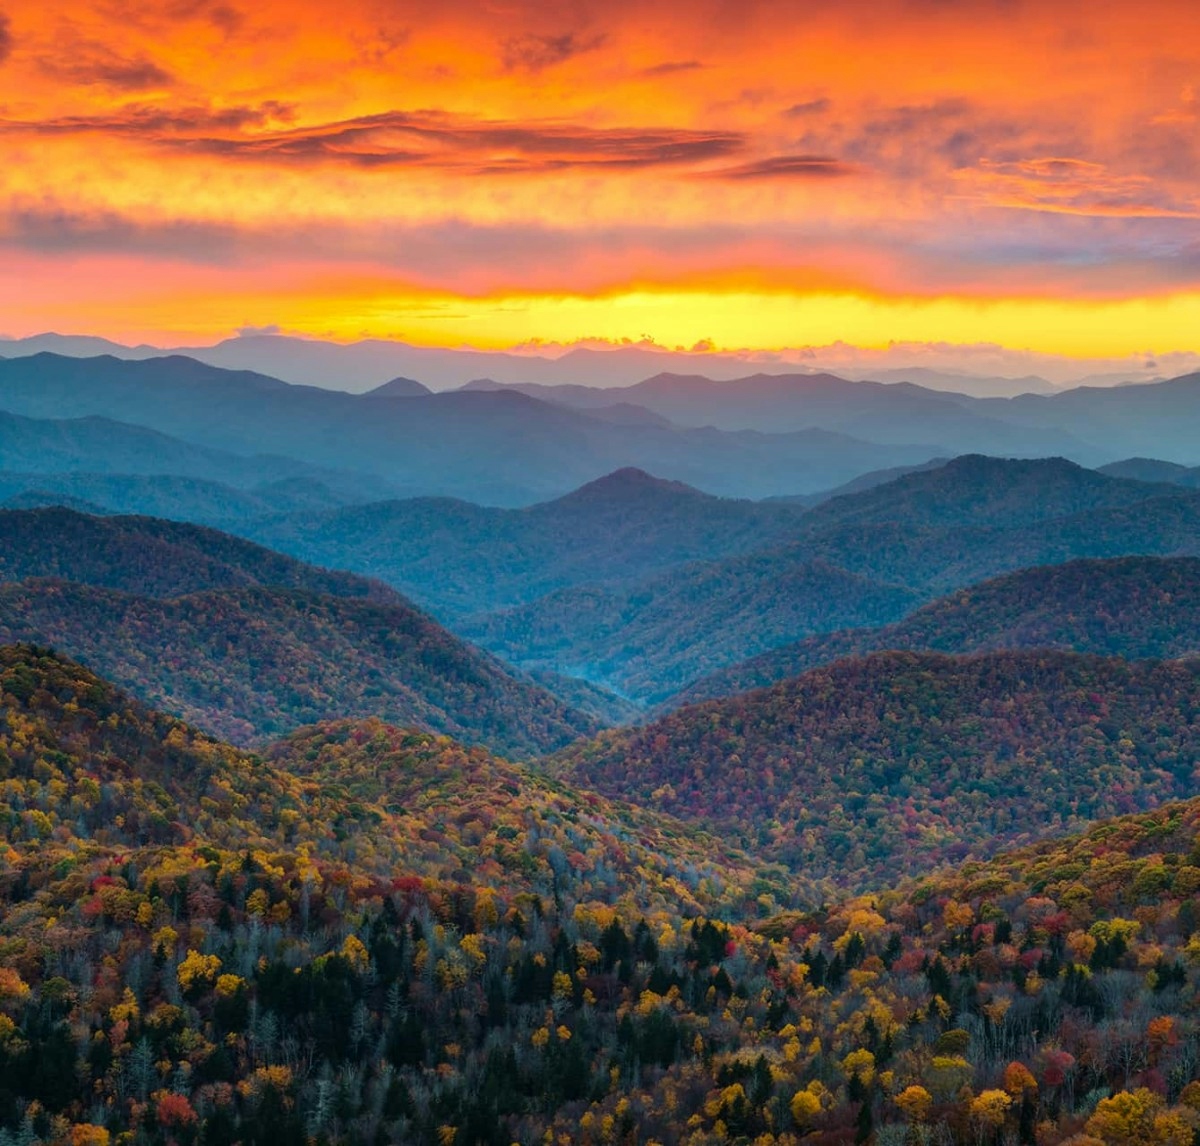 A view of the mountains during sunset with bright orange and yellow sky